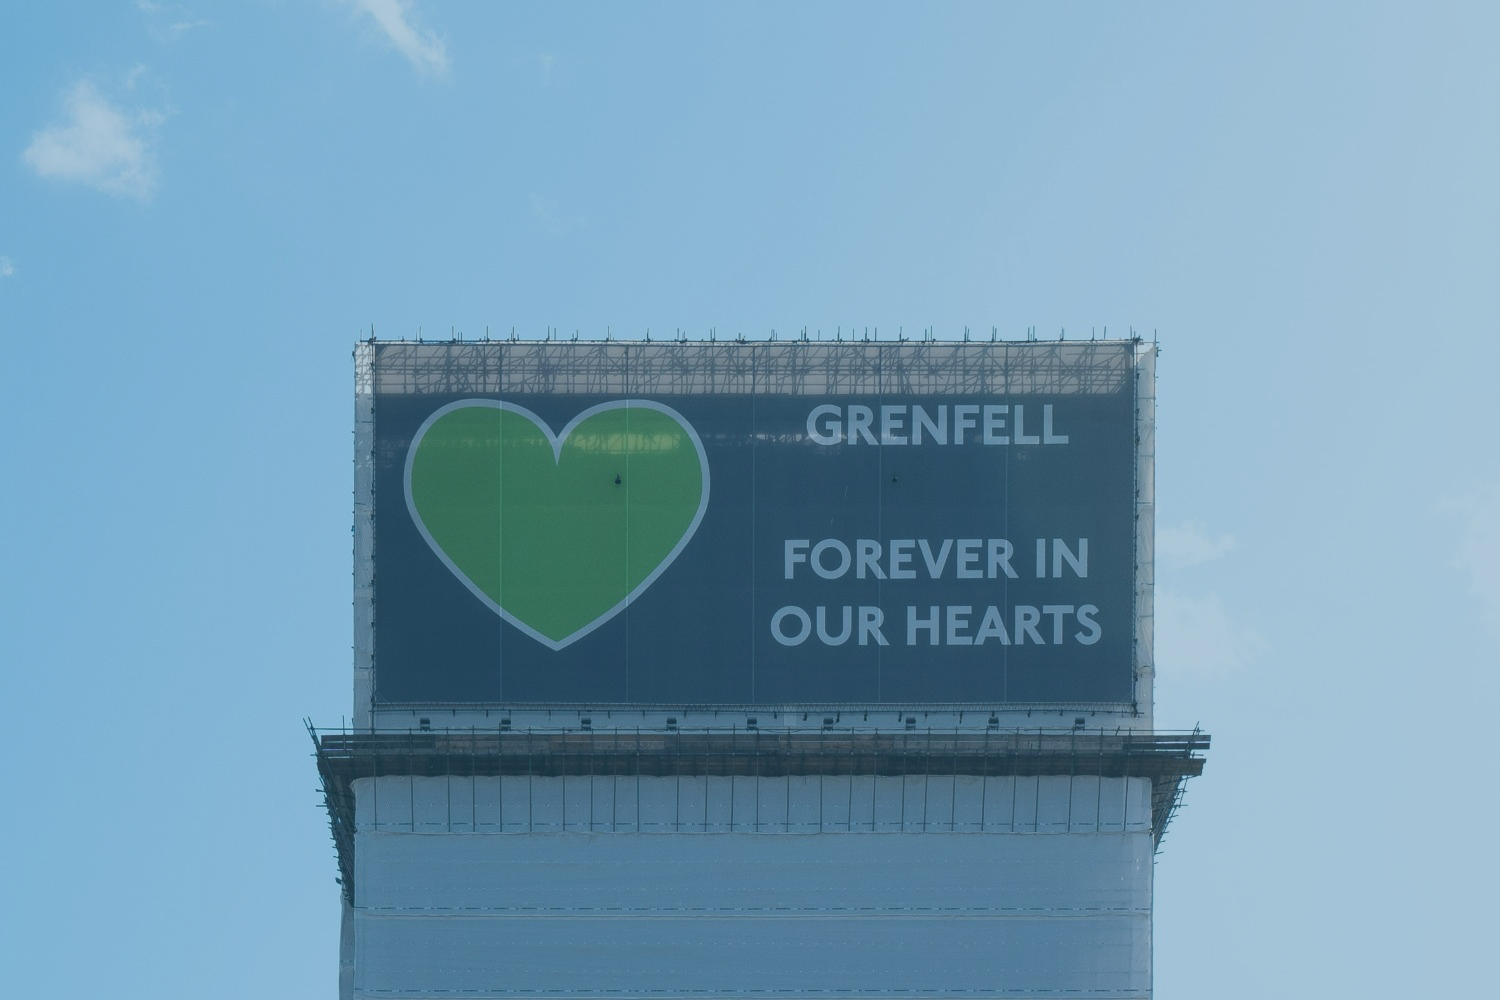 Grenfell Tower, wrapped in a protective layer bearing the legend: Grenfell forever in our hearts